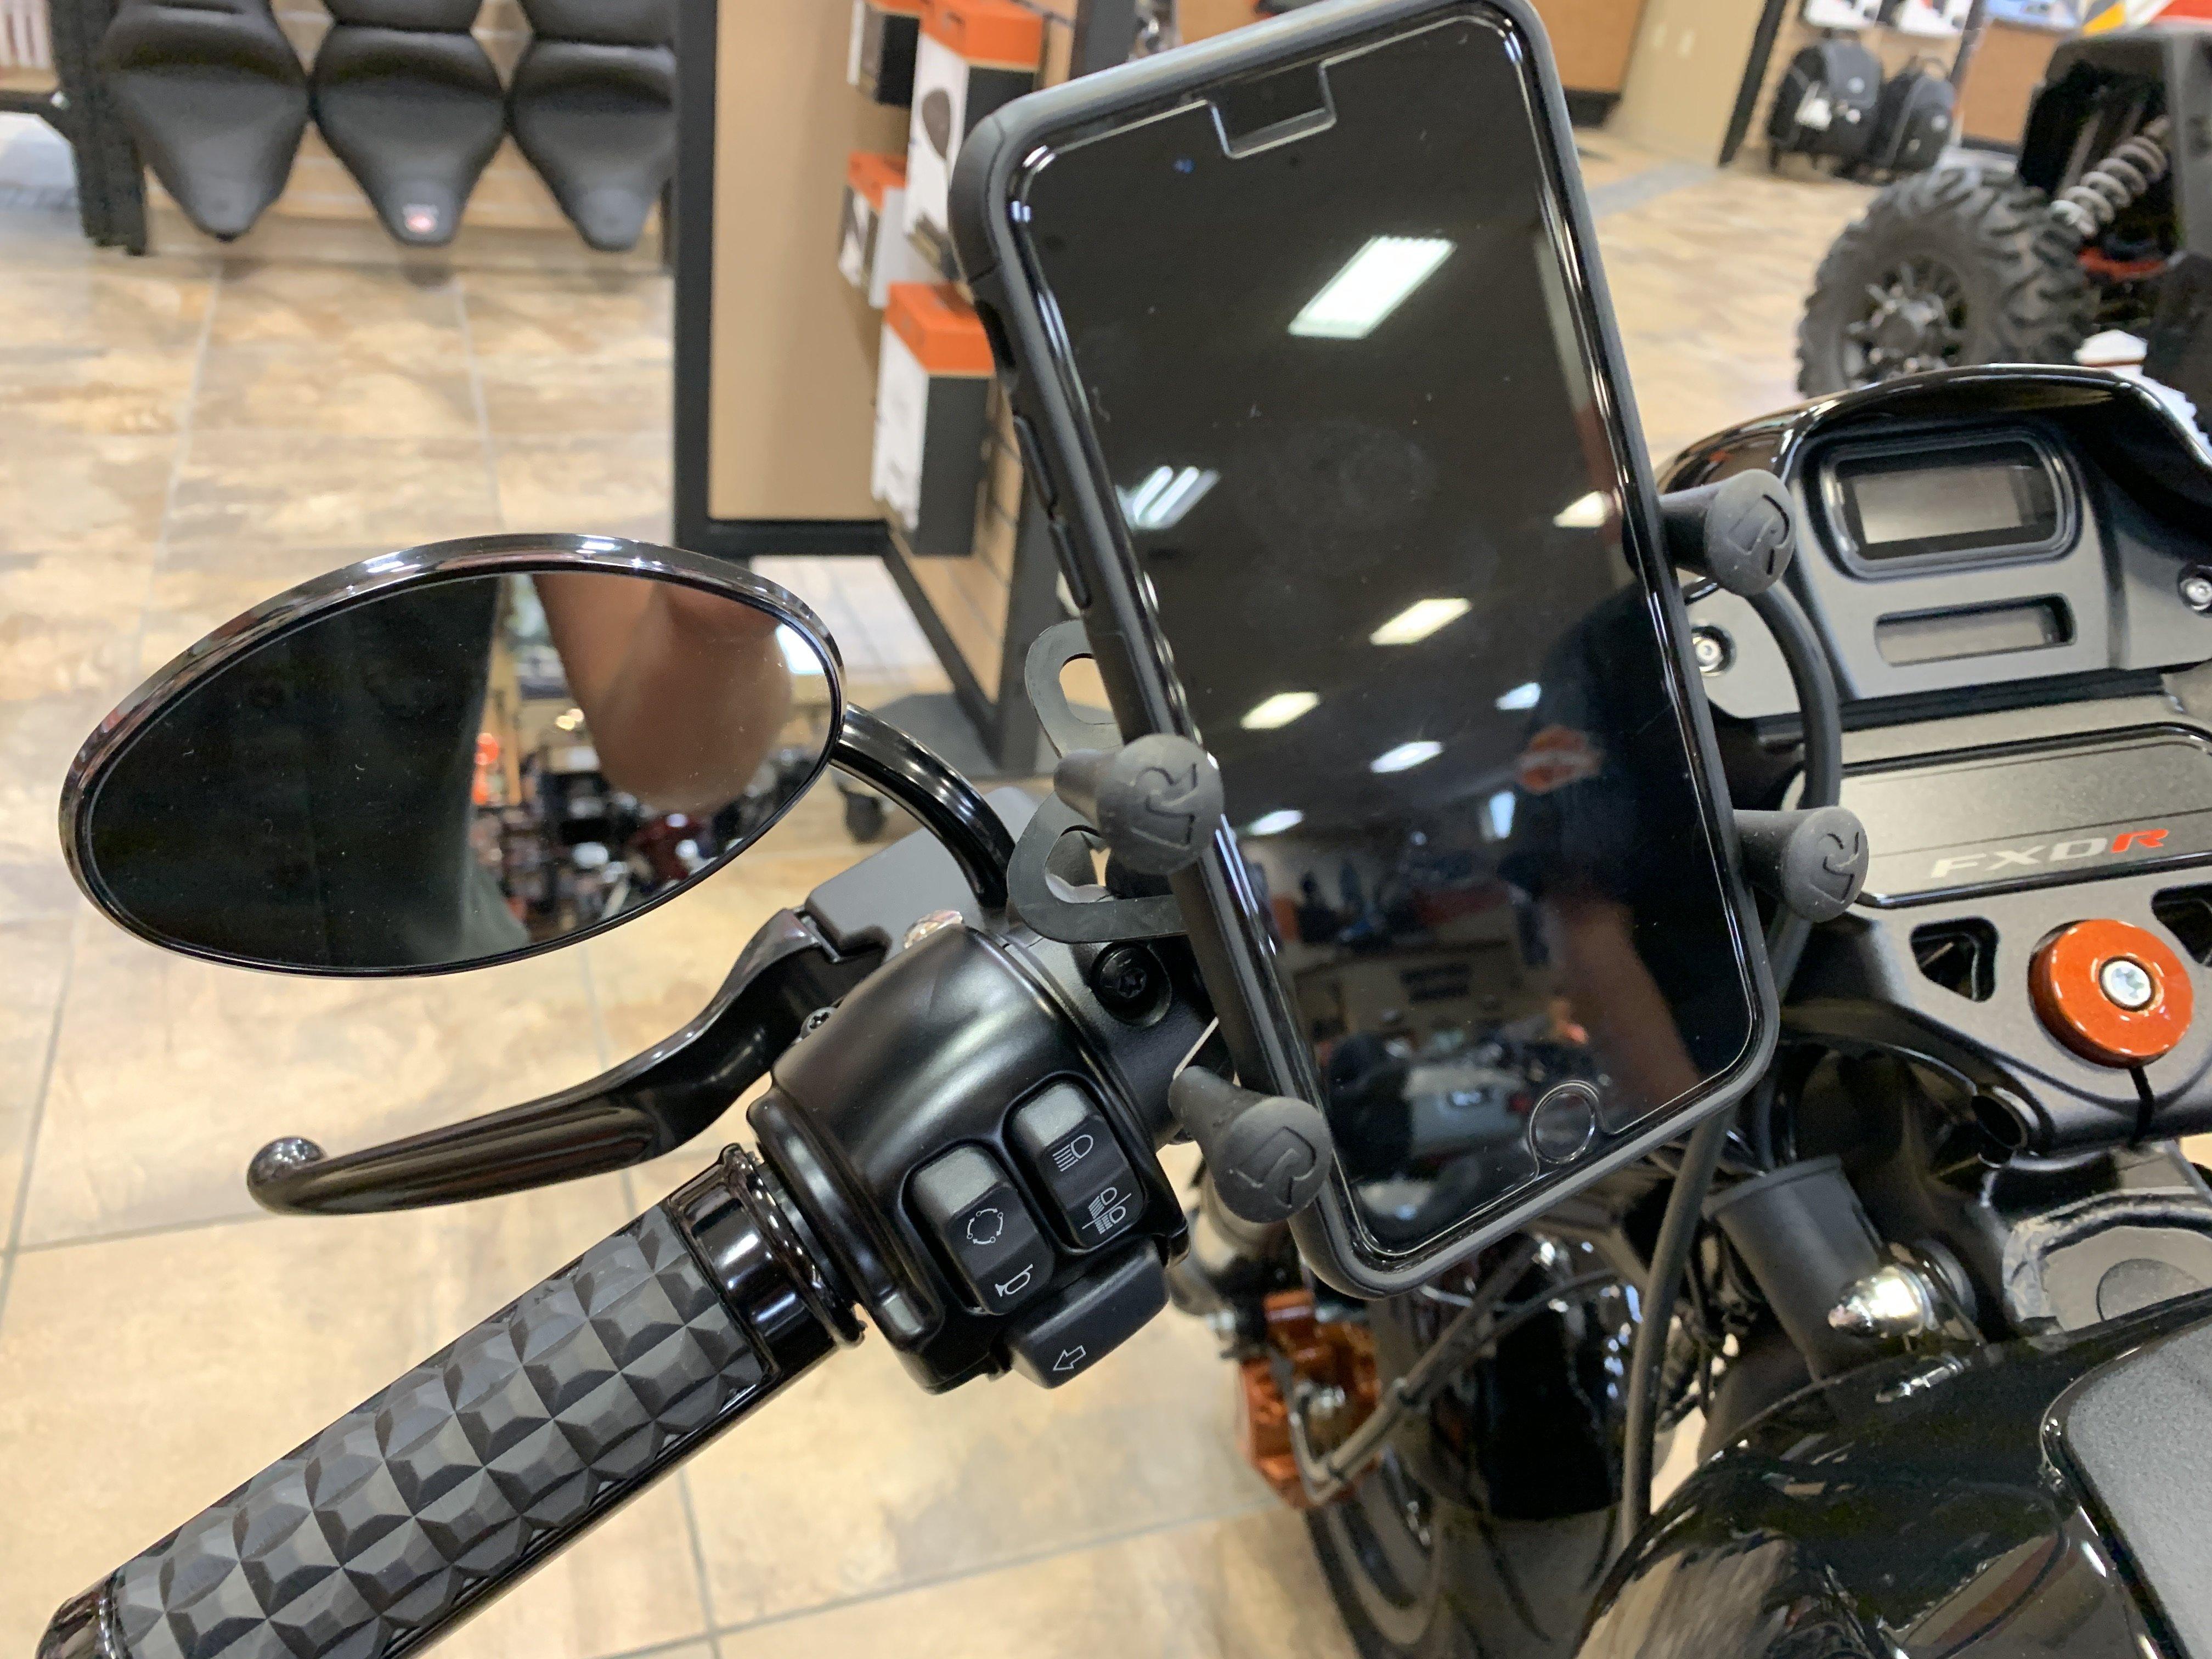 RAM X-Grip Phone Mount with RAM Snap-Link™ Tough-Claw™ Compatible with Harley-Davidson